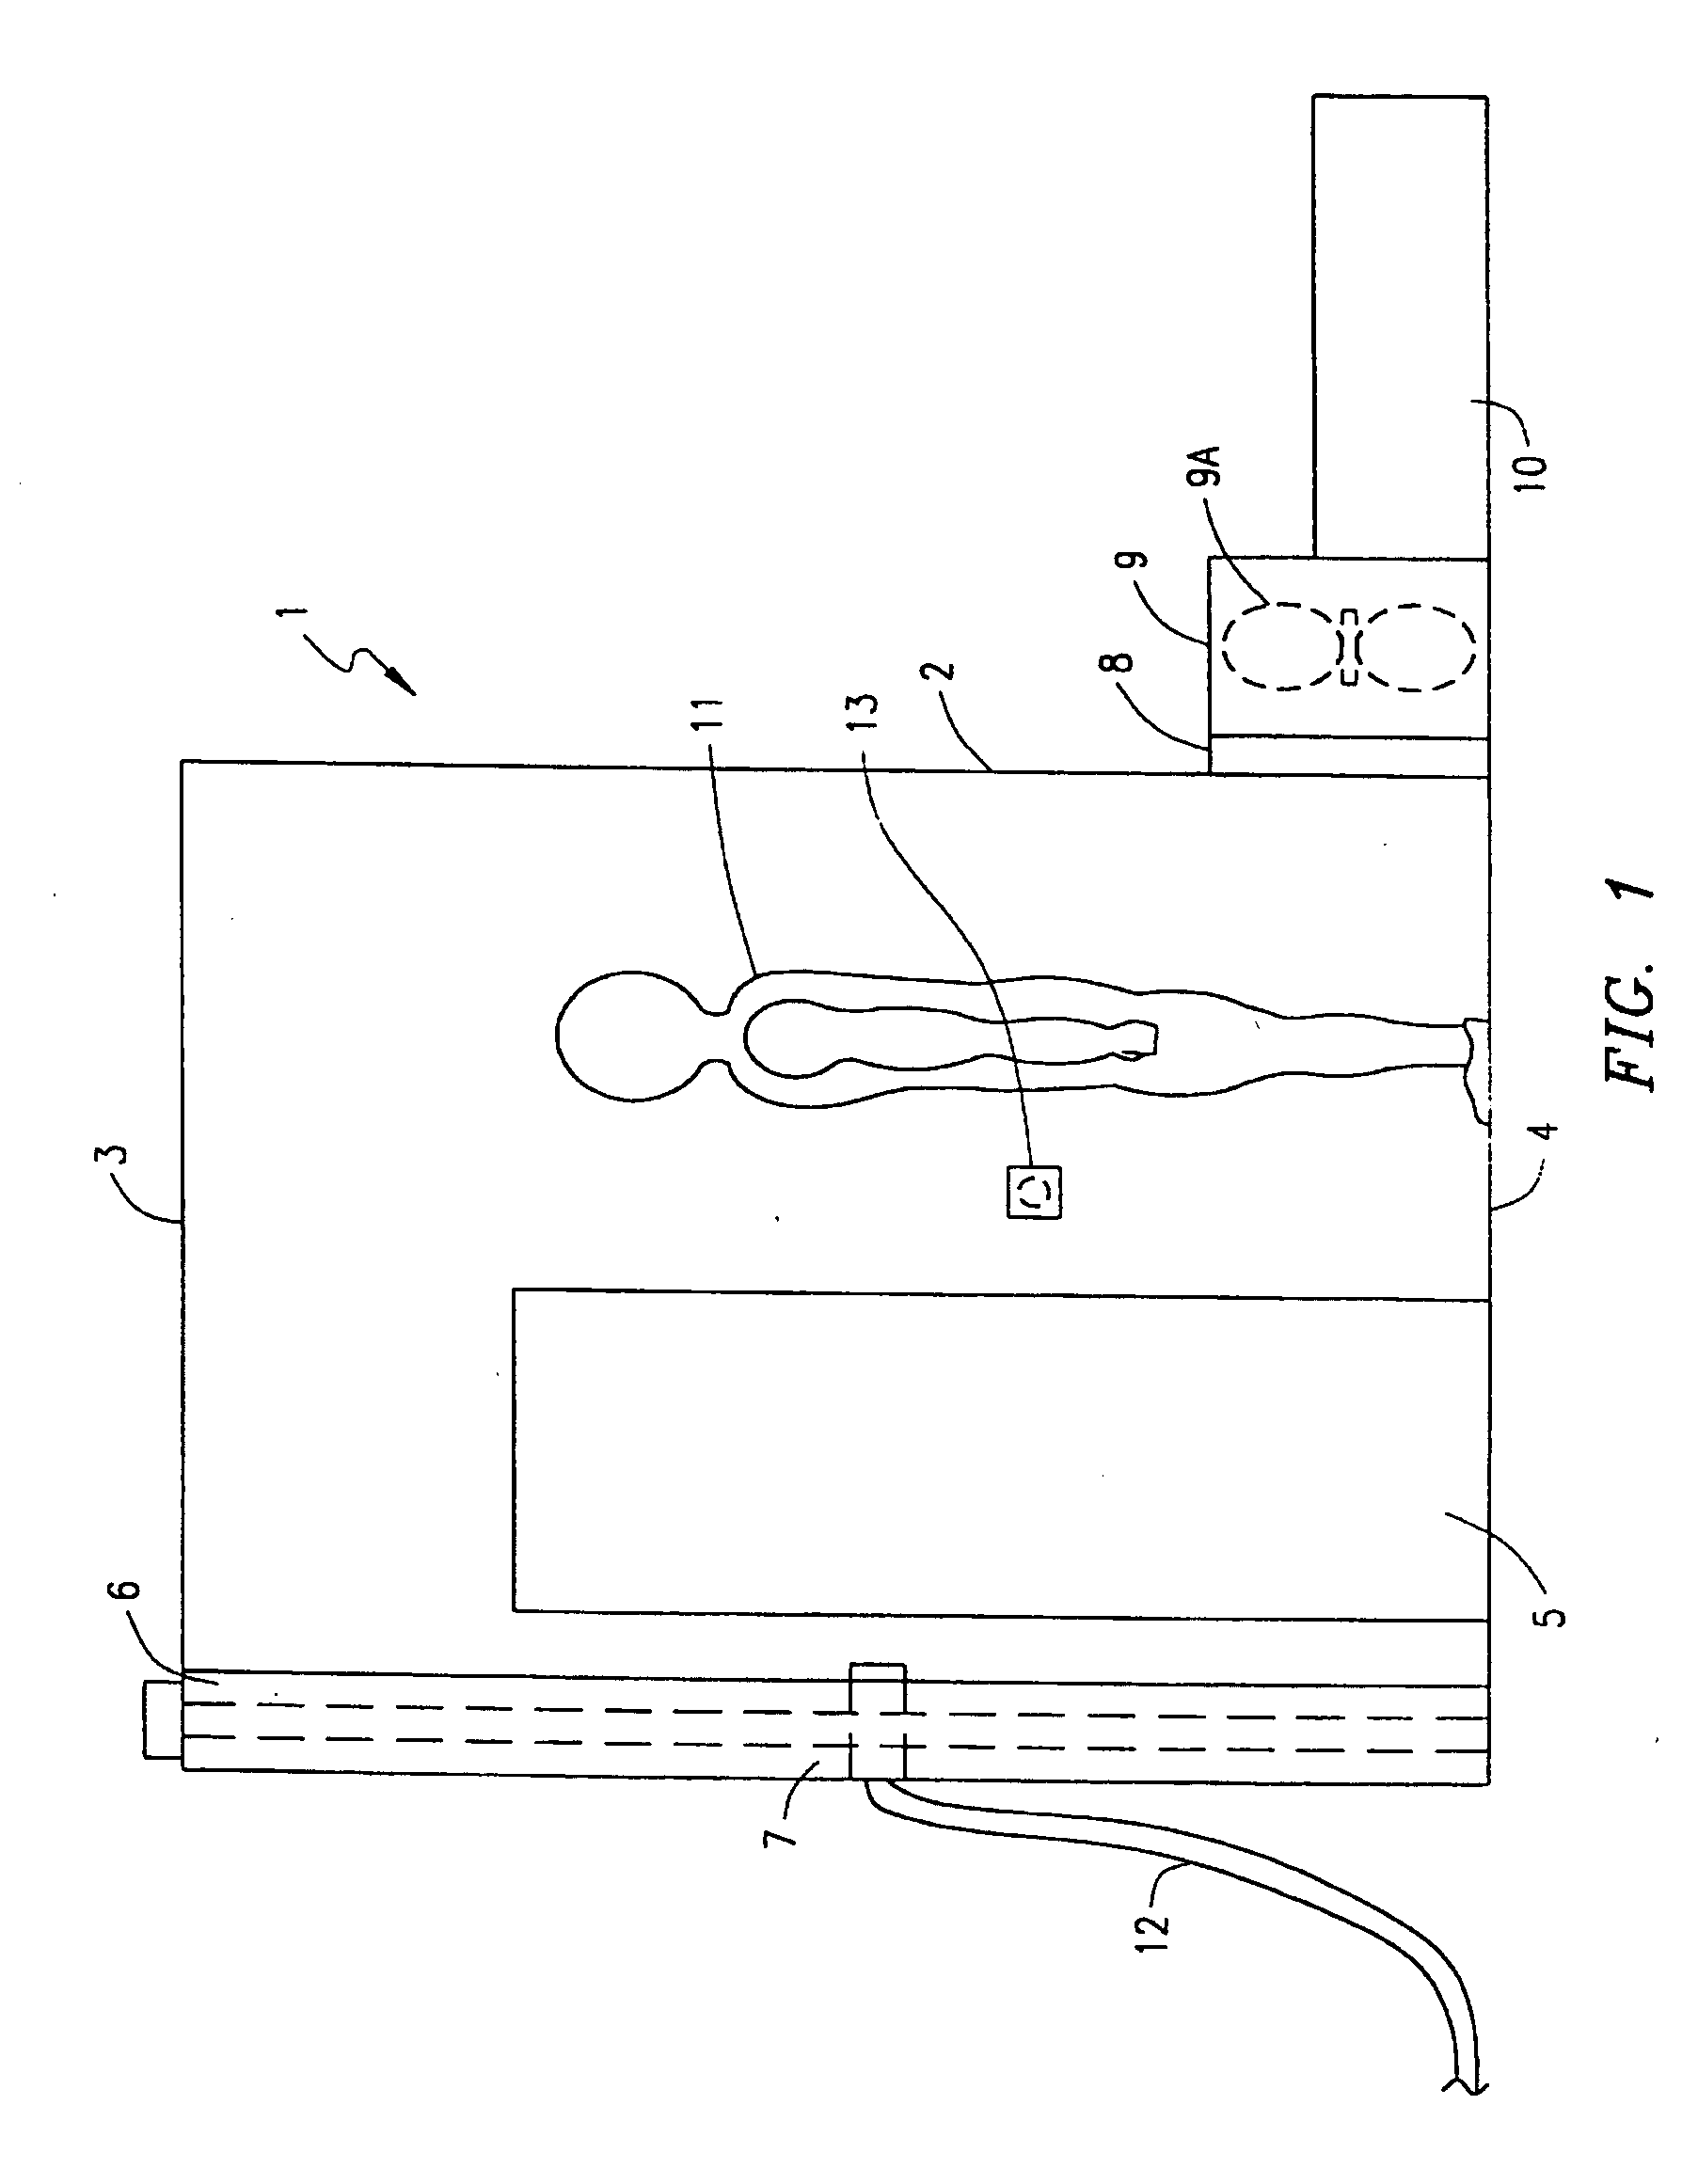 Misting apparatus for electrostatic application of coating materials to body surfaces